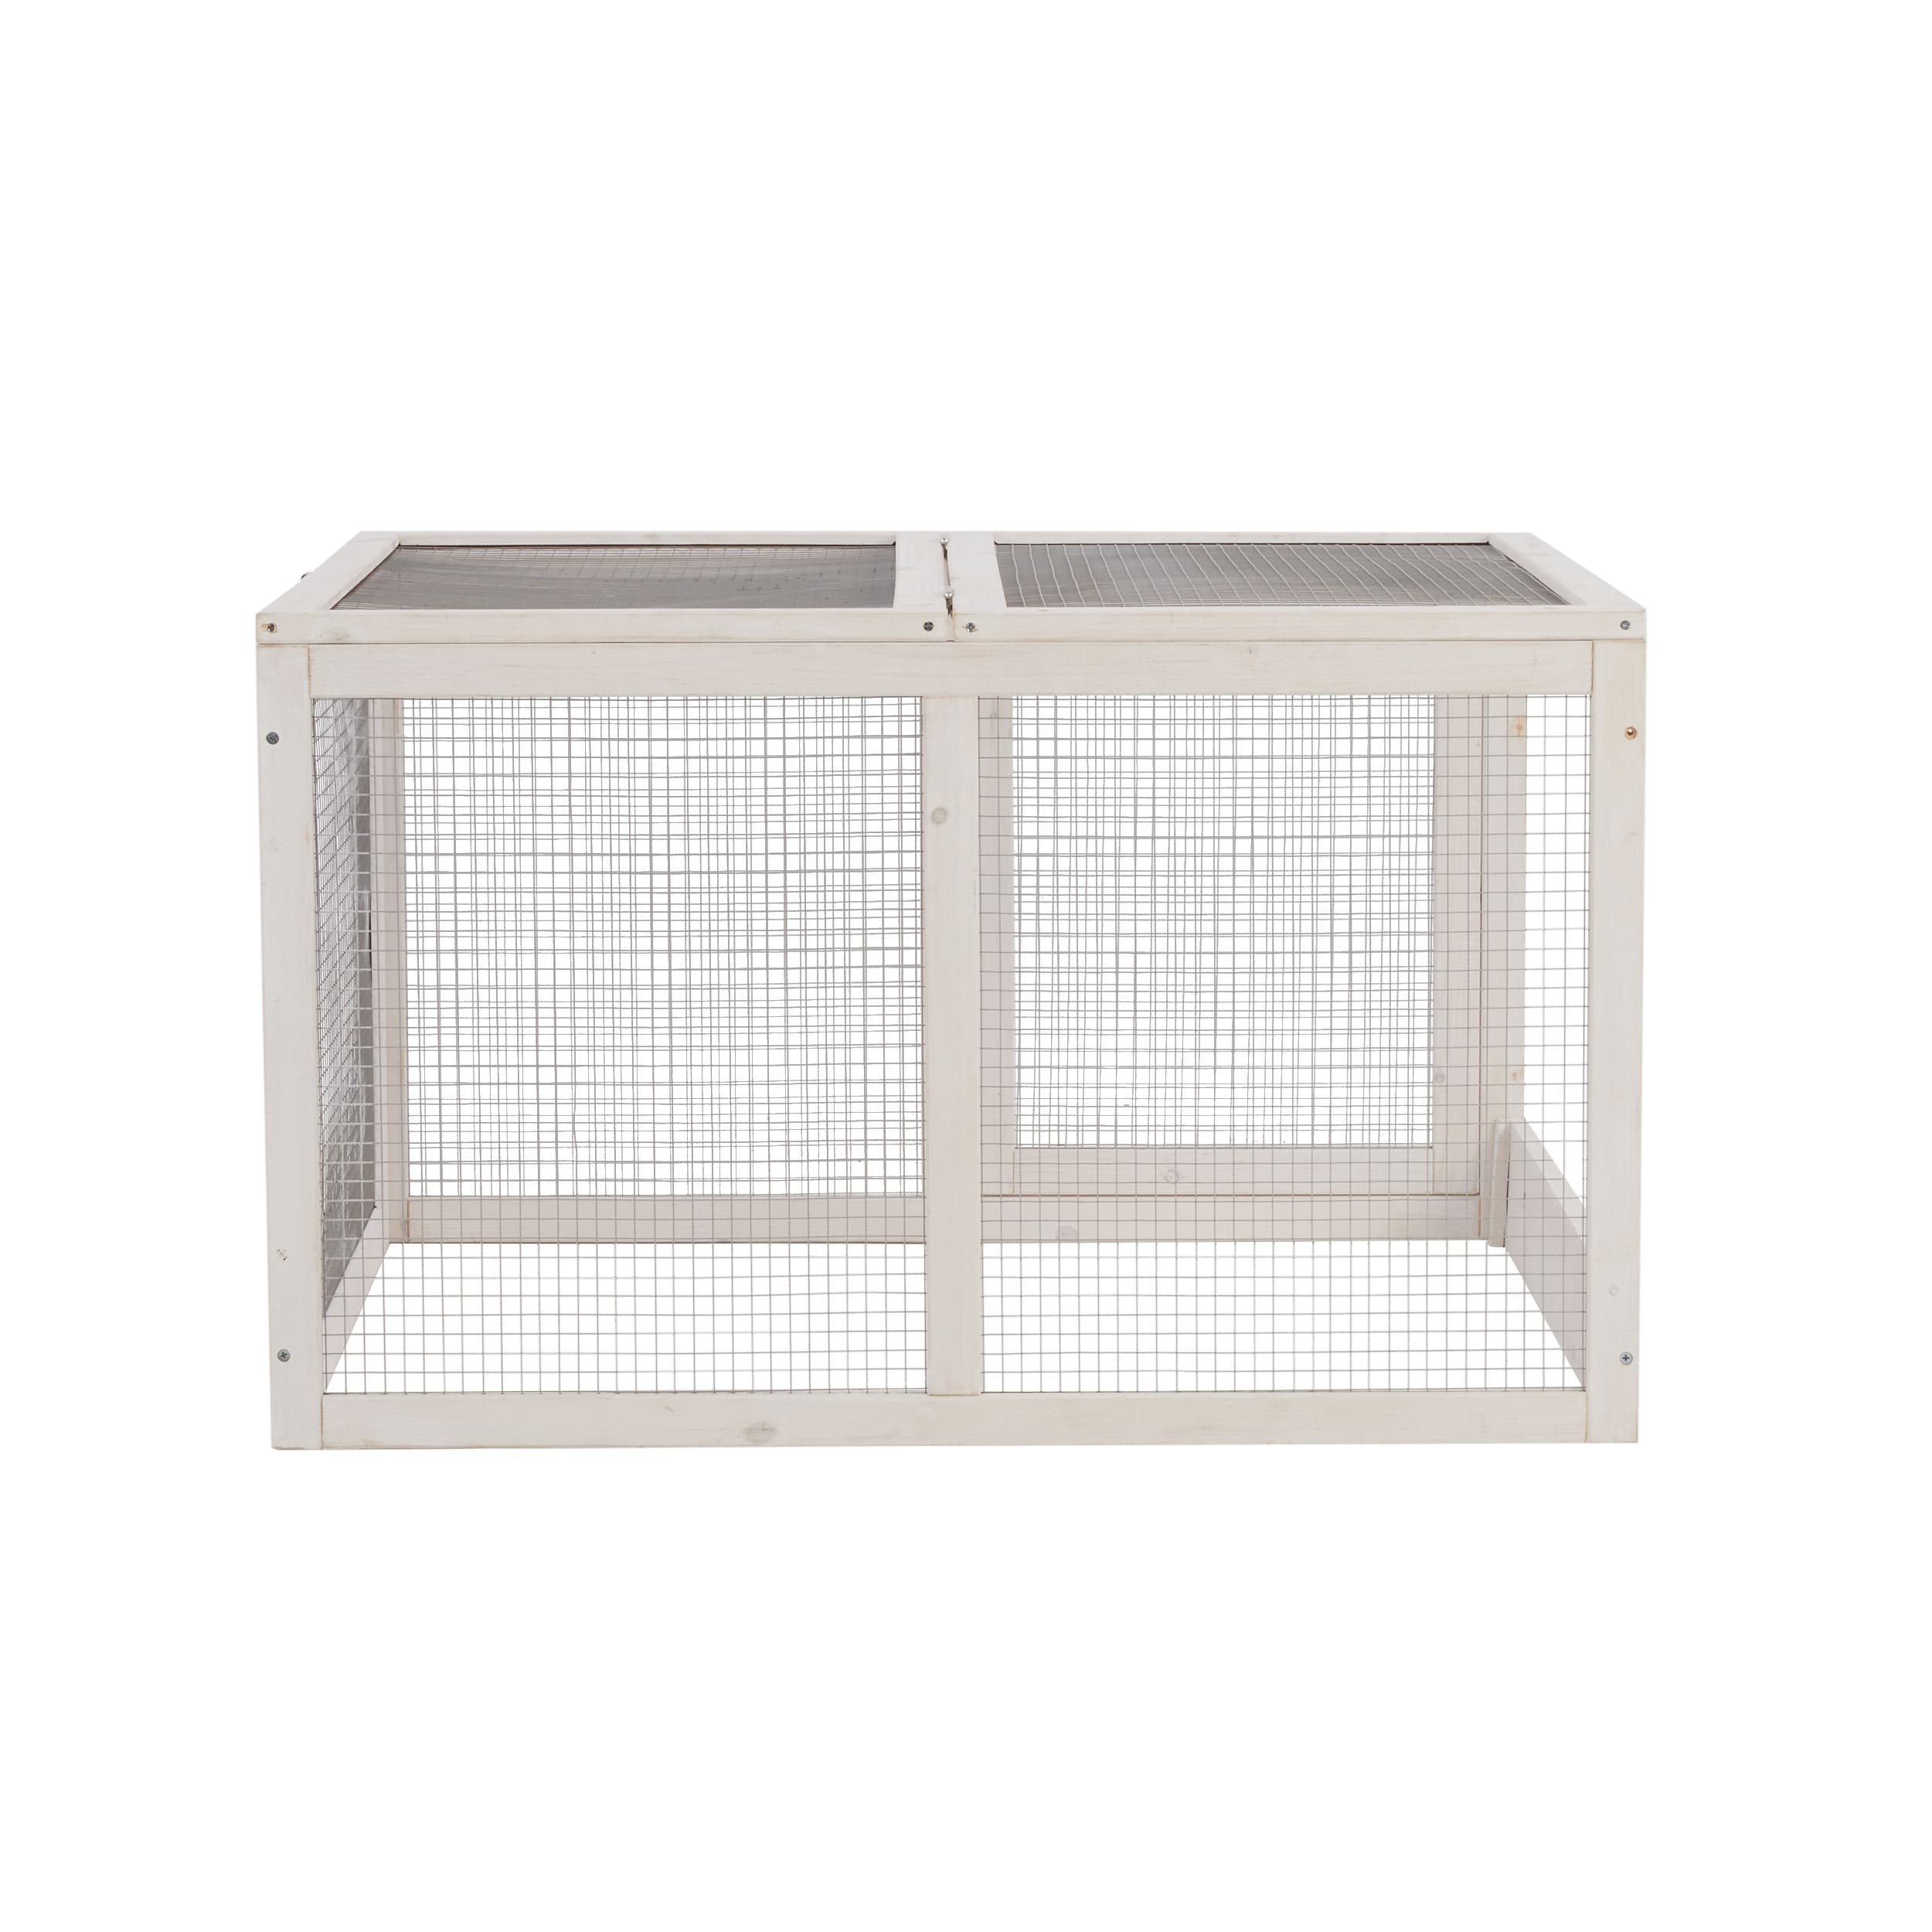 angst gedragen paling Off-white Chicken Coops & Rabbit Hutches at Lowes.com